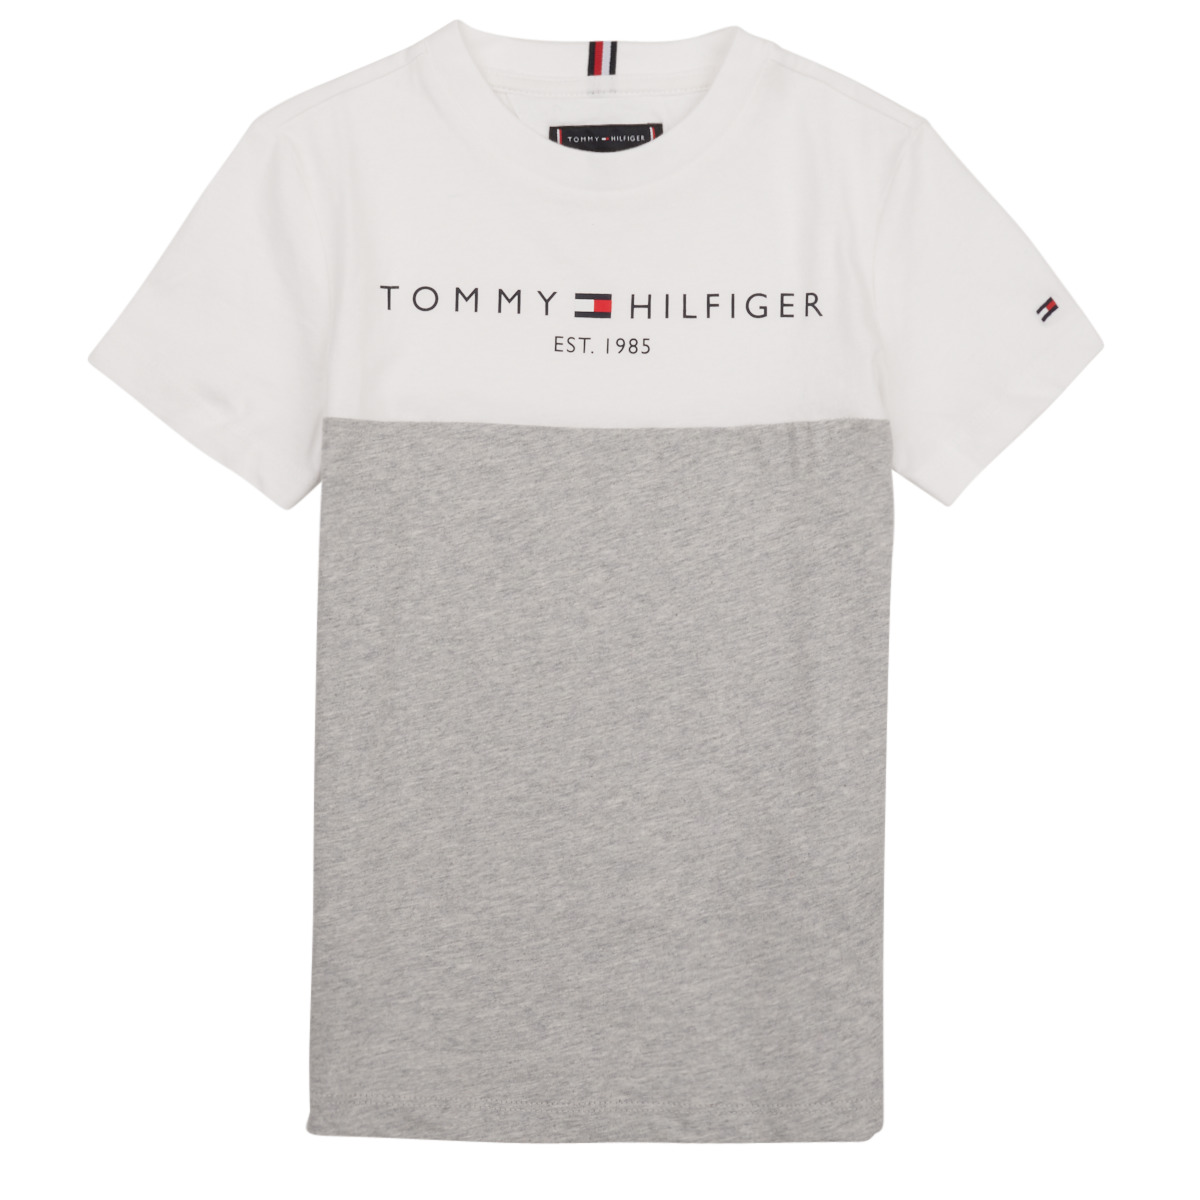 Tommy Hilfiger 30,40 Child / Spartoo COLORBLOCK - Fast ! | TEE S/S White € short-sleeved Europe - Clothing ESSENTIAL Grey delivery t-shirts